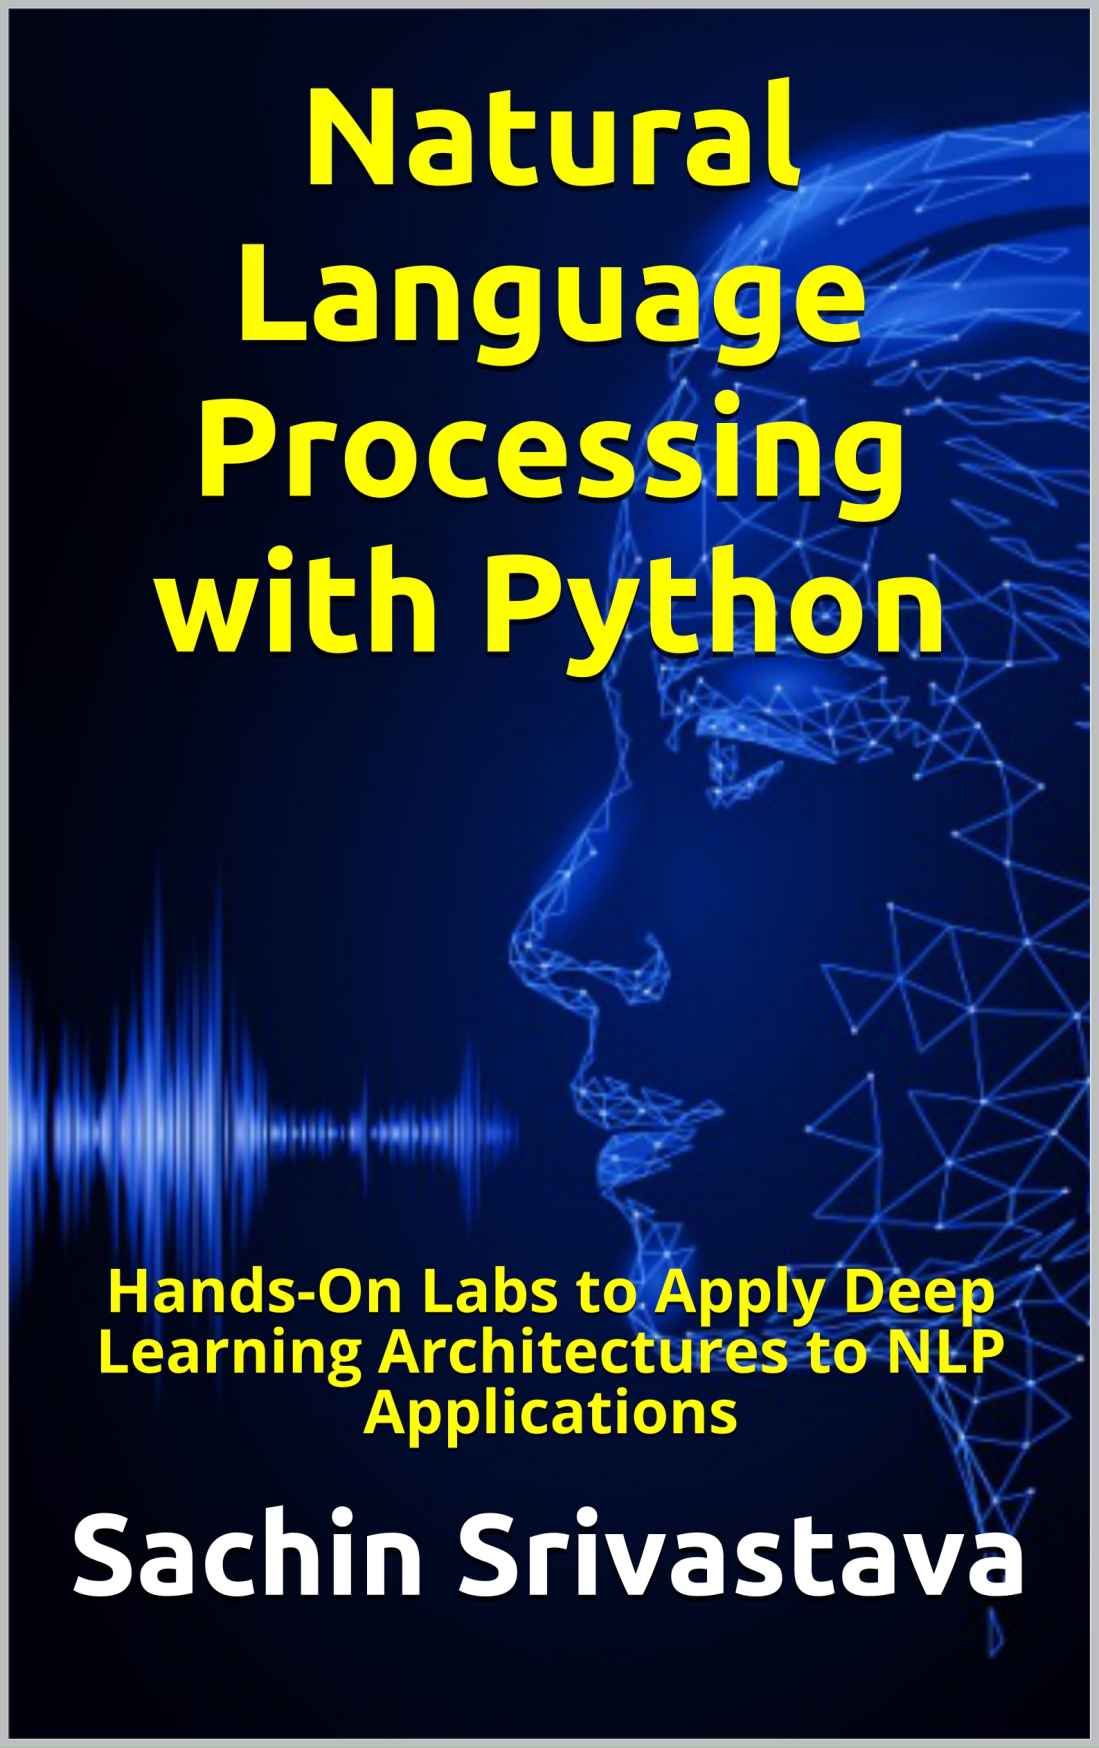 Natural Language Processing with Python: Hands-On Labs to Apply Deep Learning Architectures to NLP Applications